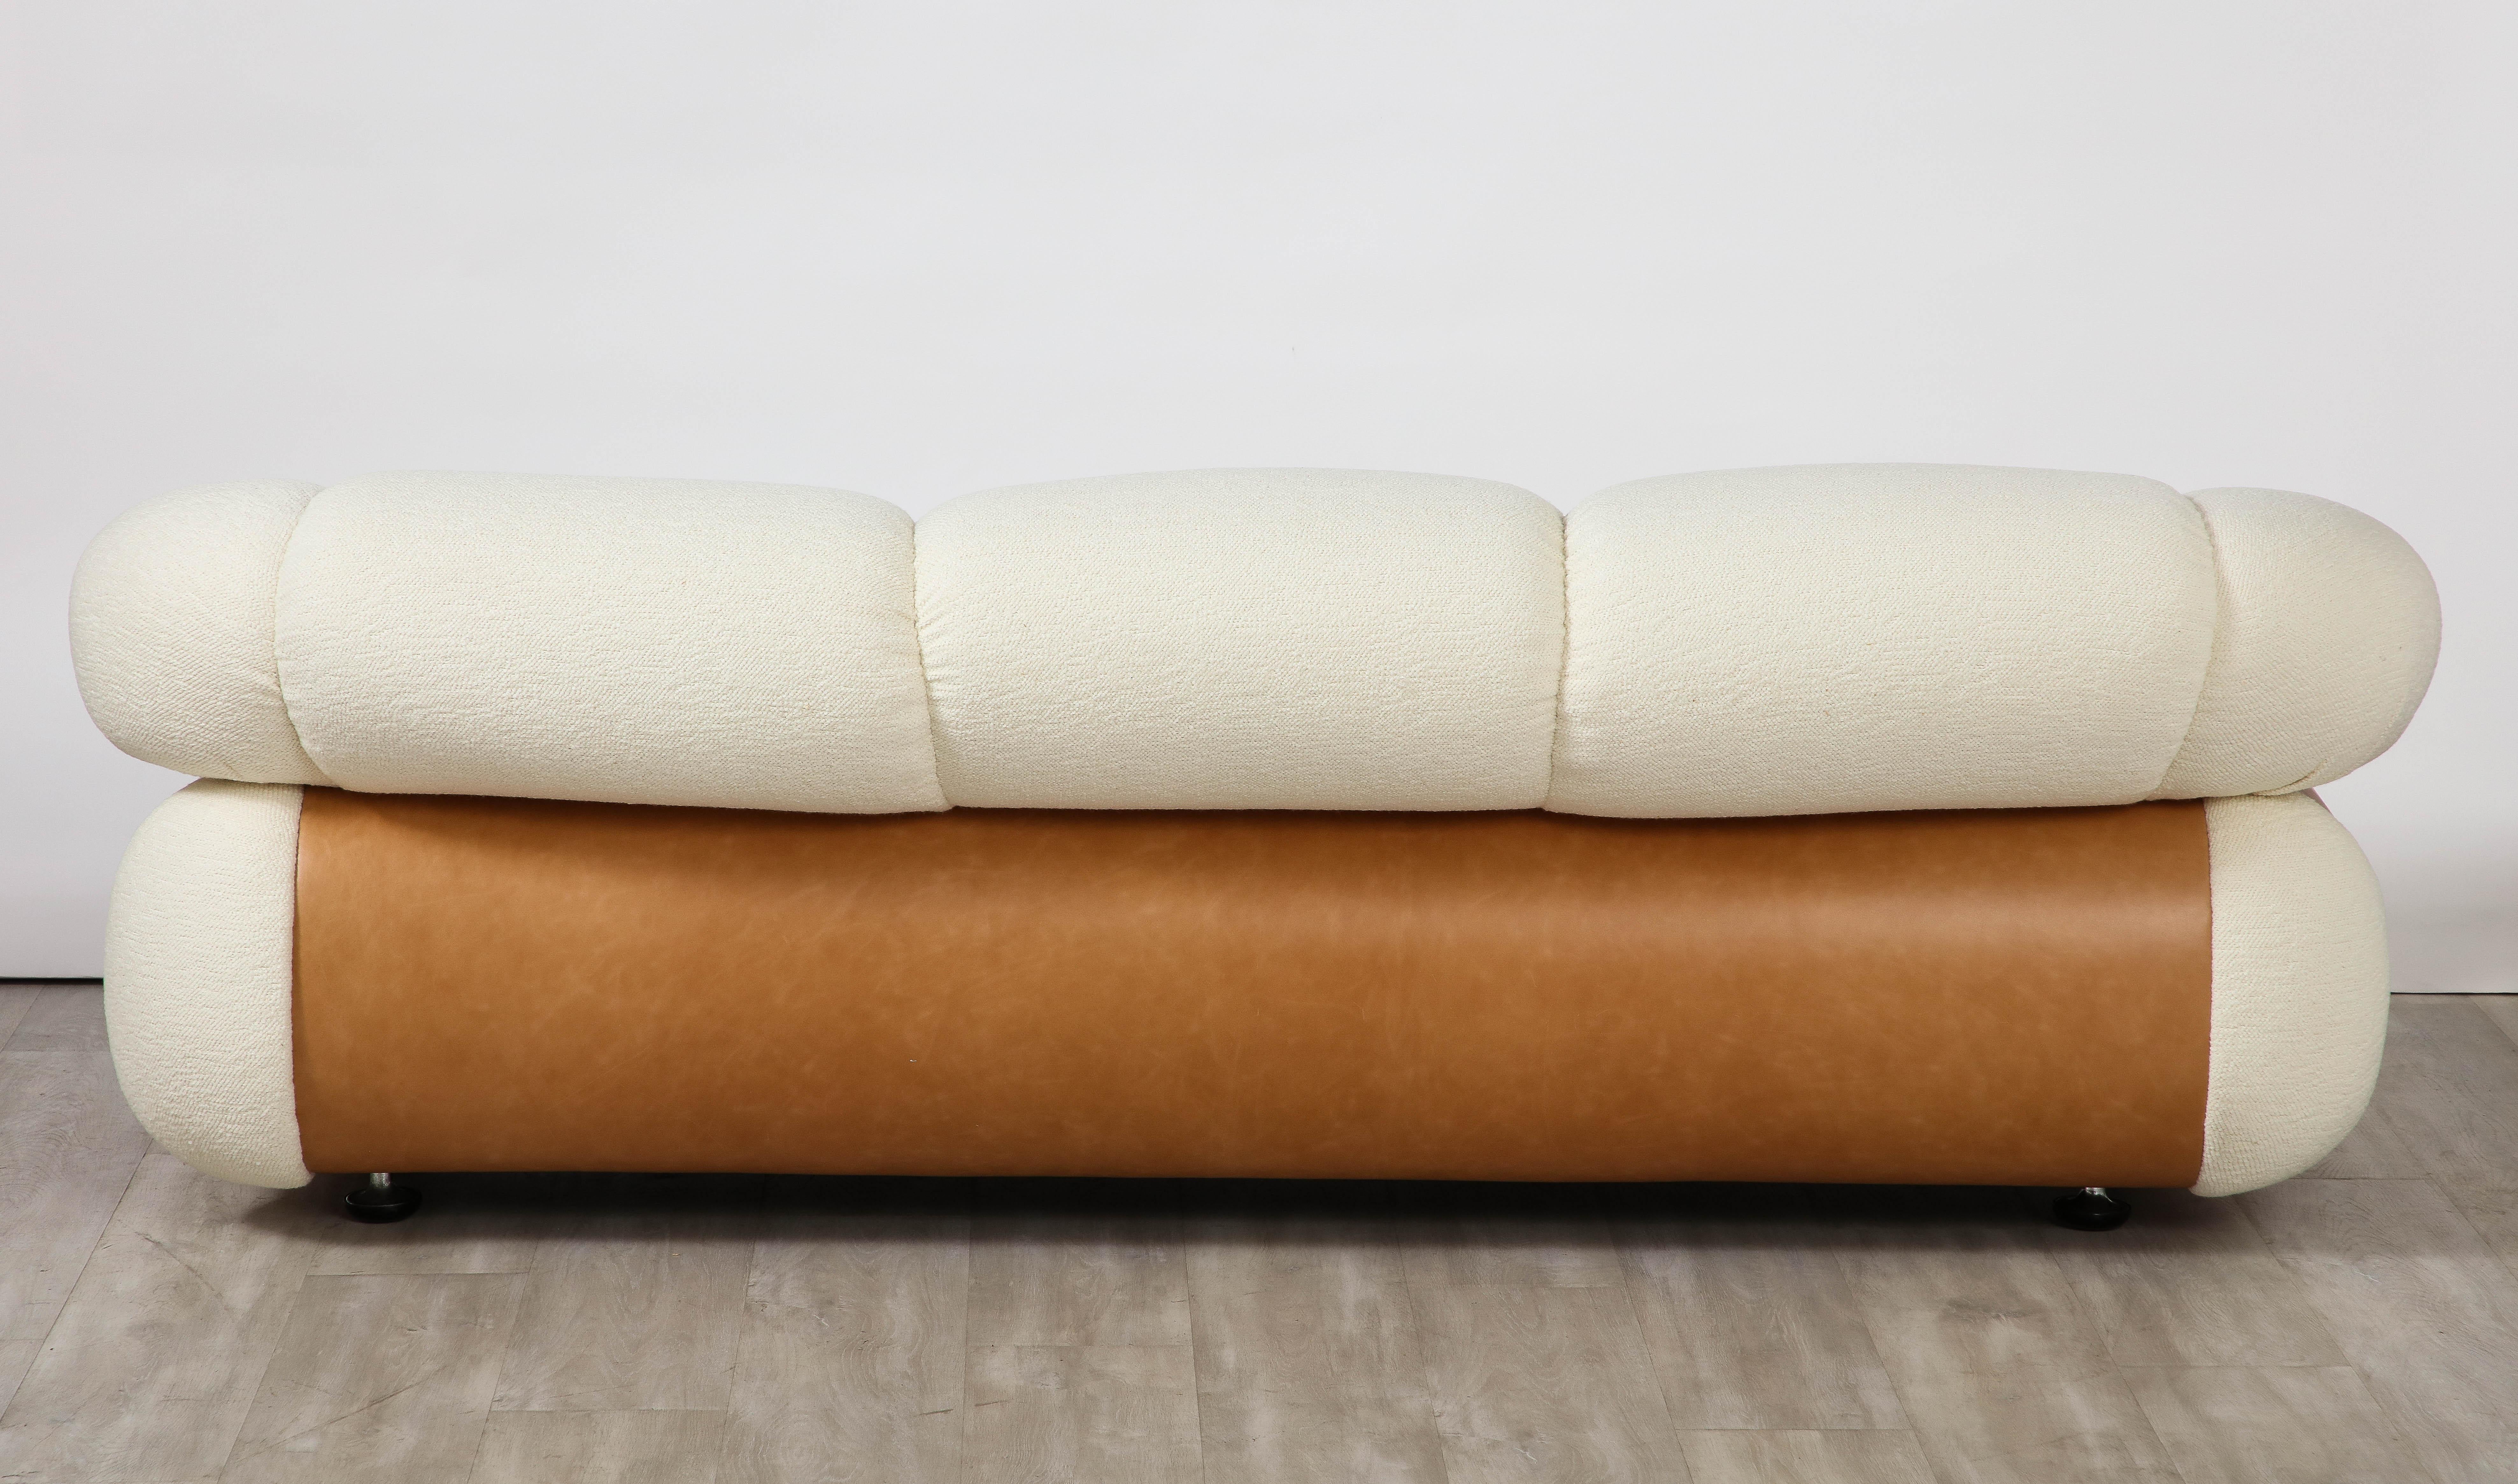 Adriano Piazzesi Italian 1970's Channel Tufted Sofa For Sale 3